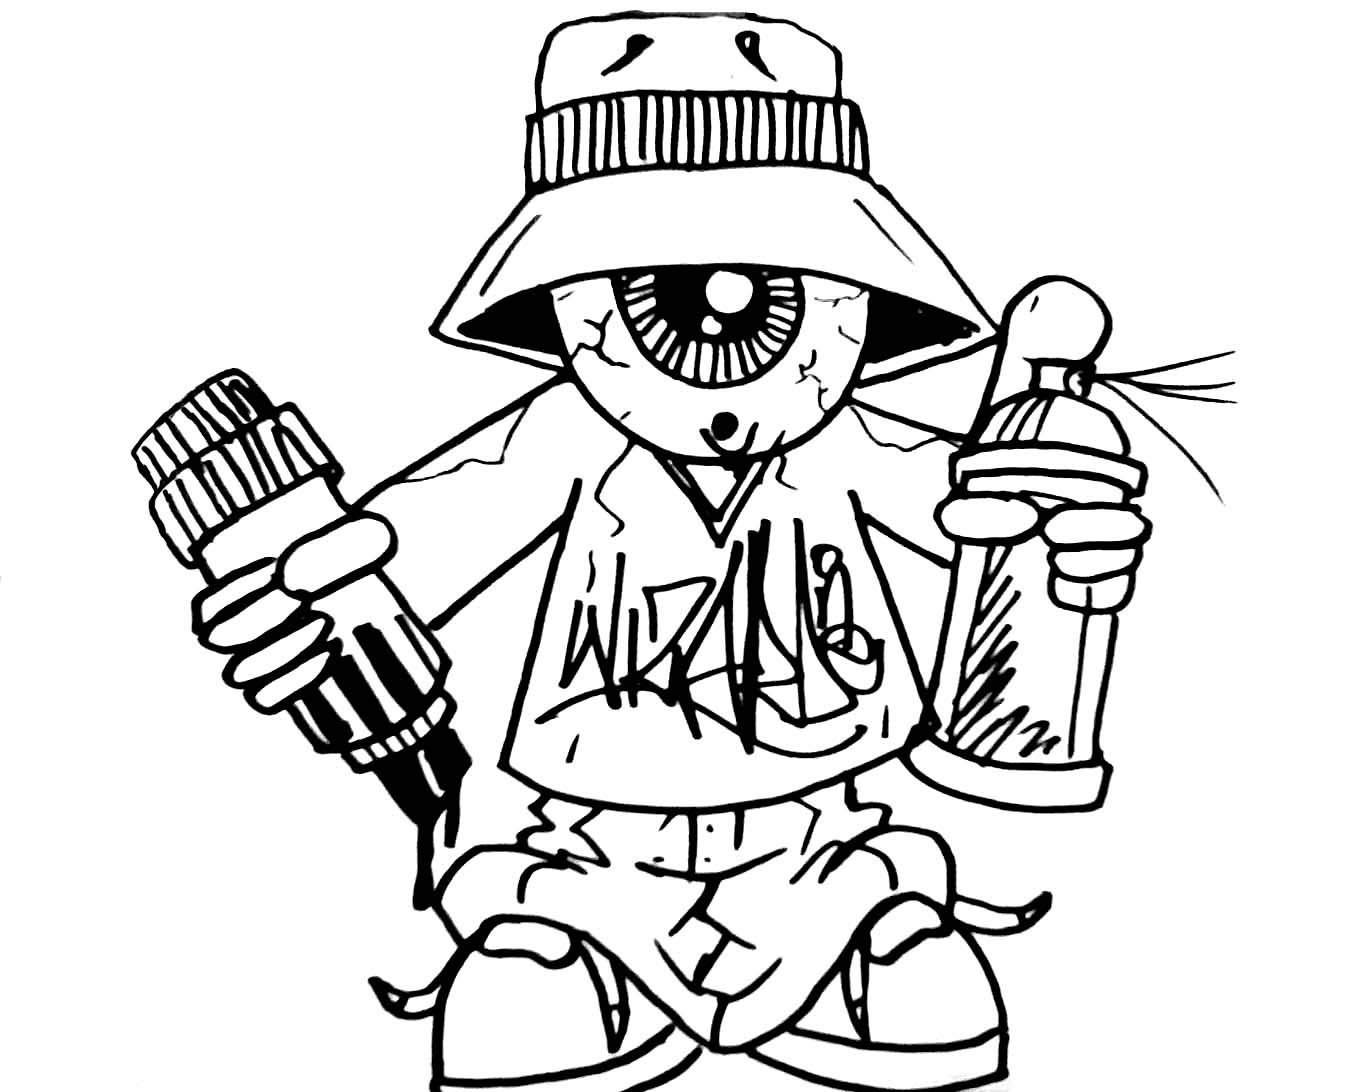 Graffiti Coloring Pages for Teens and Adults Best Coloring Pages For Kids